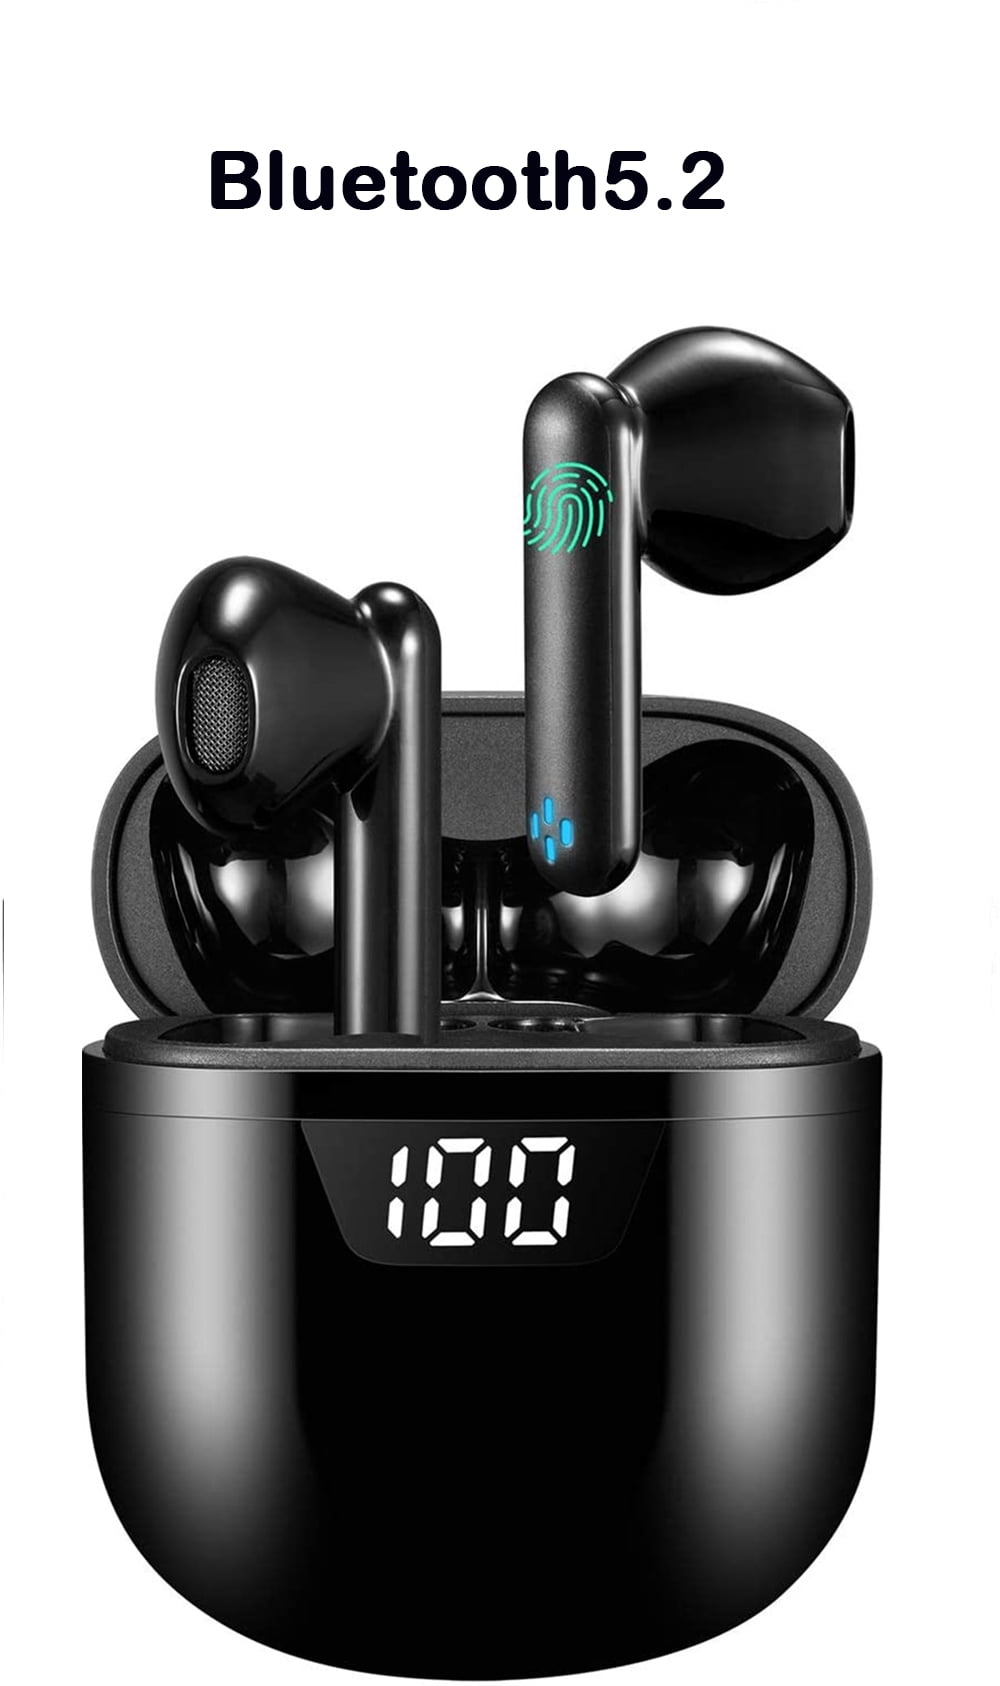 Bluetooth 5.0 Wireless Headphone Pop-ups Auto Pairing Smart Touch Control Earphones Noise Canceling 3D Stereo Waterproof Sports Headset compatible with Apple Airpods Android/Iphone